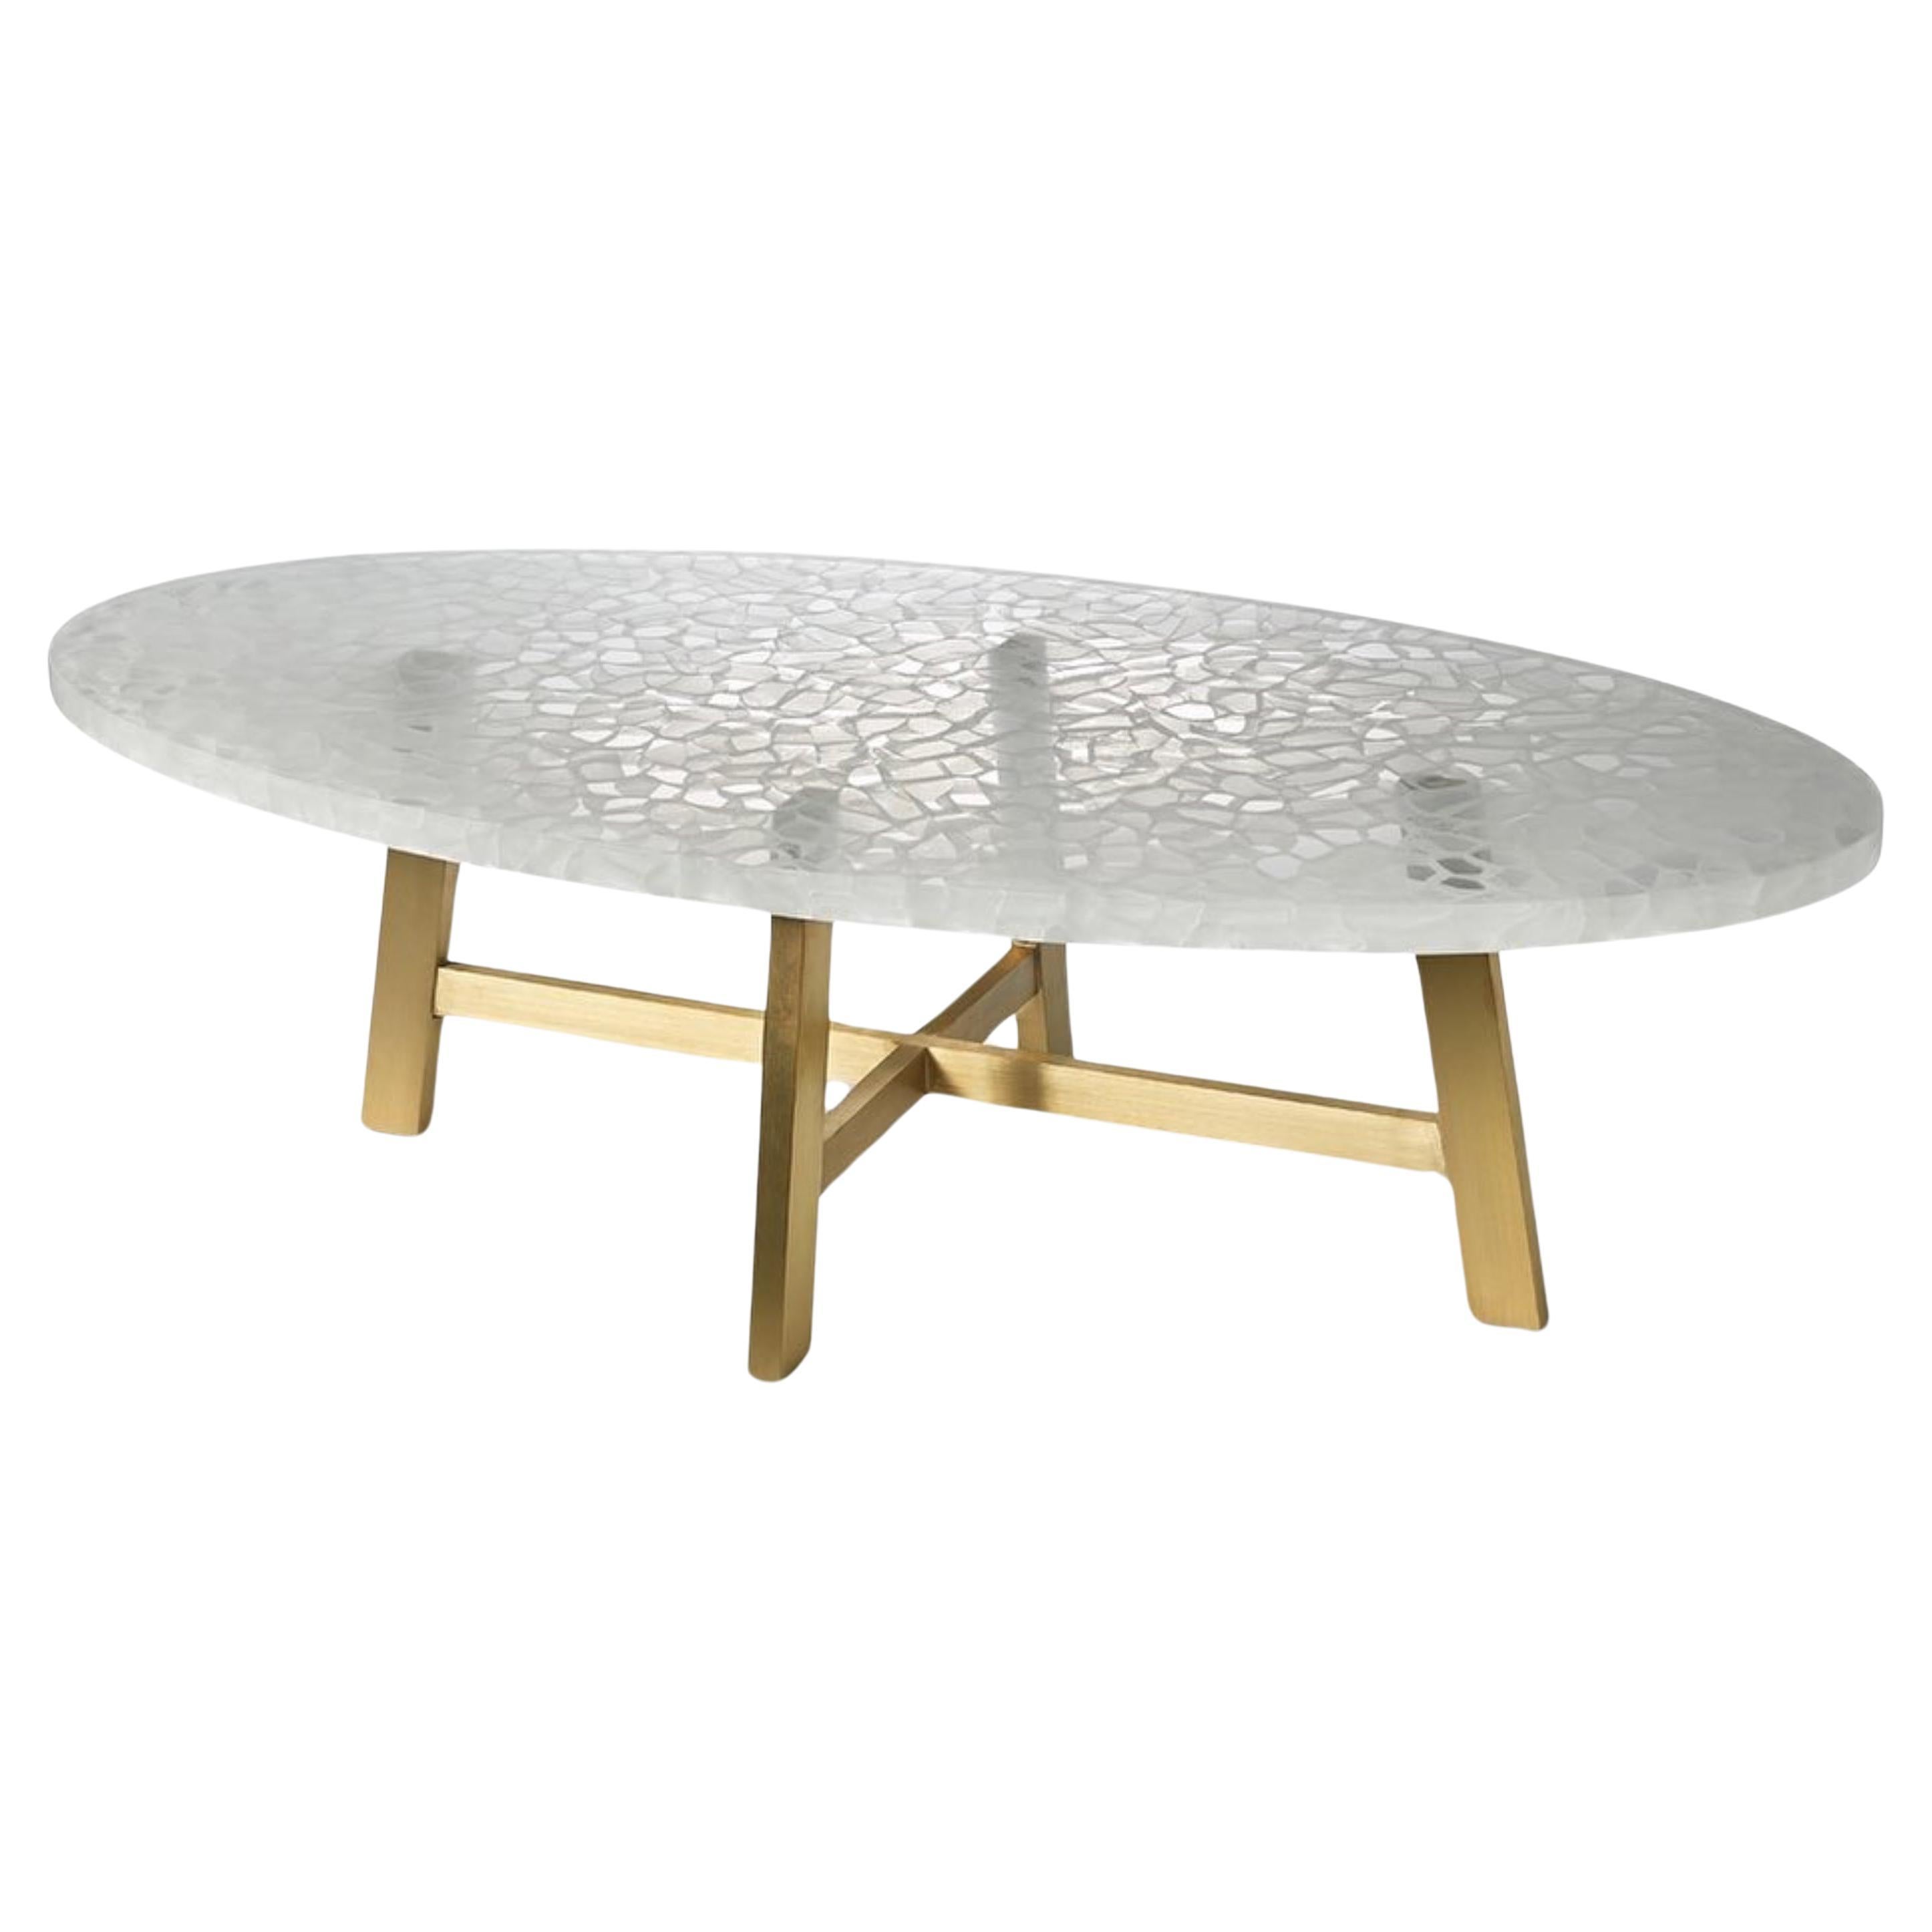 Rothwell Table by The GoodMan Studio